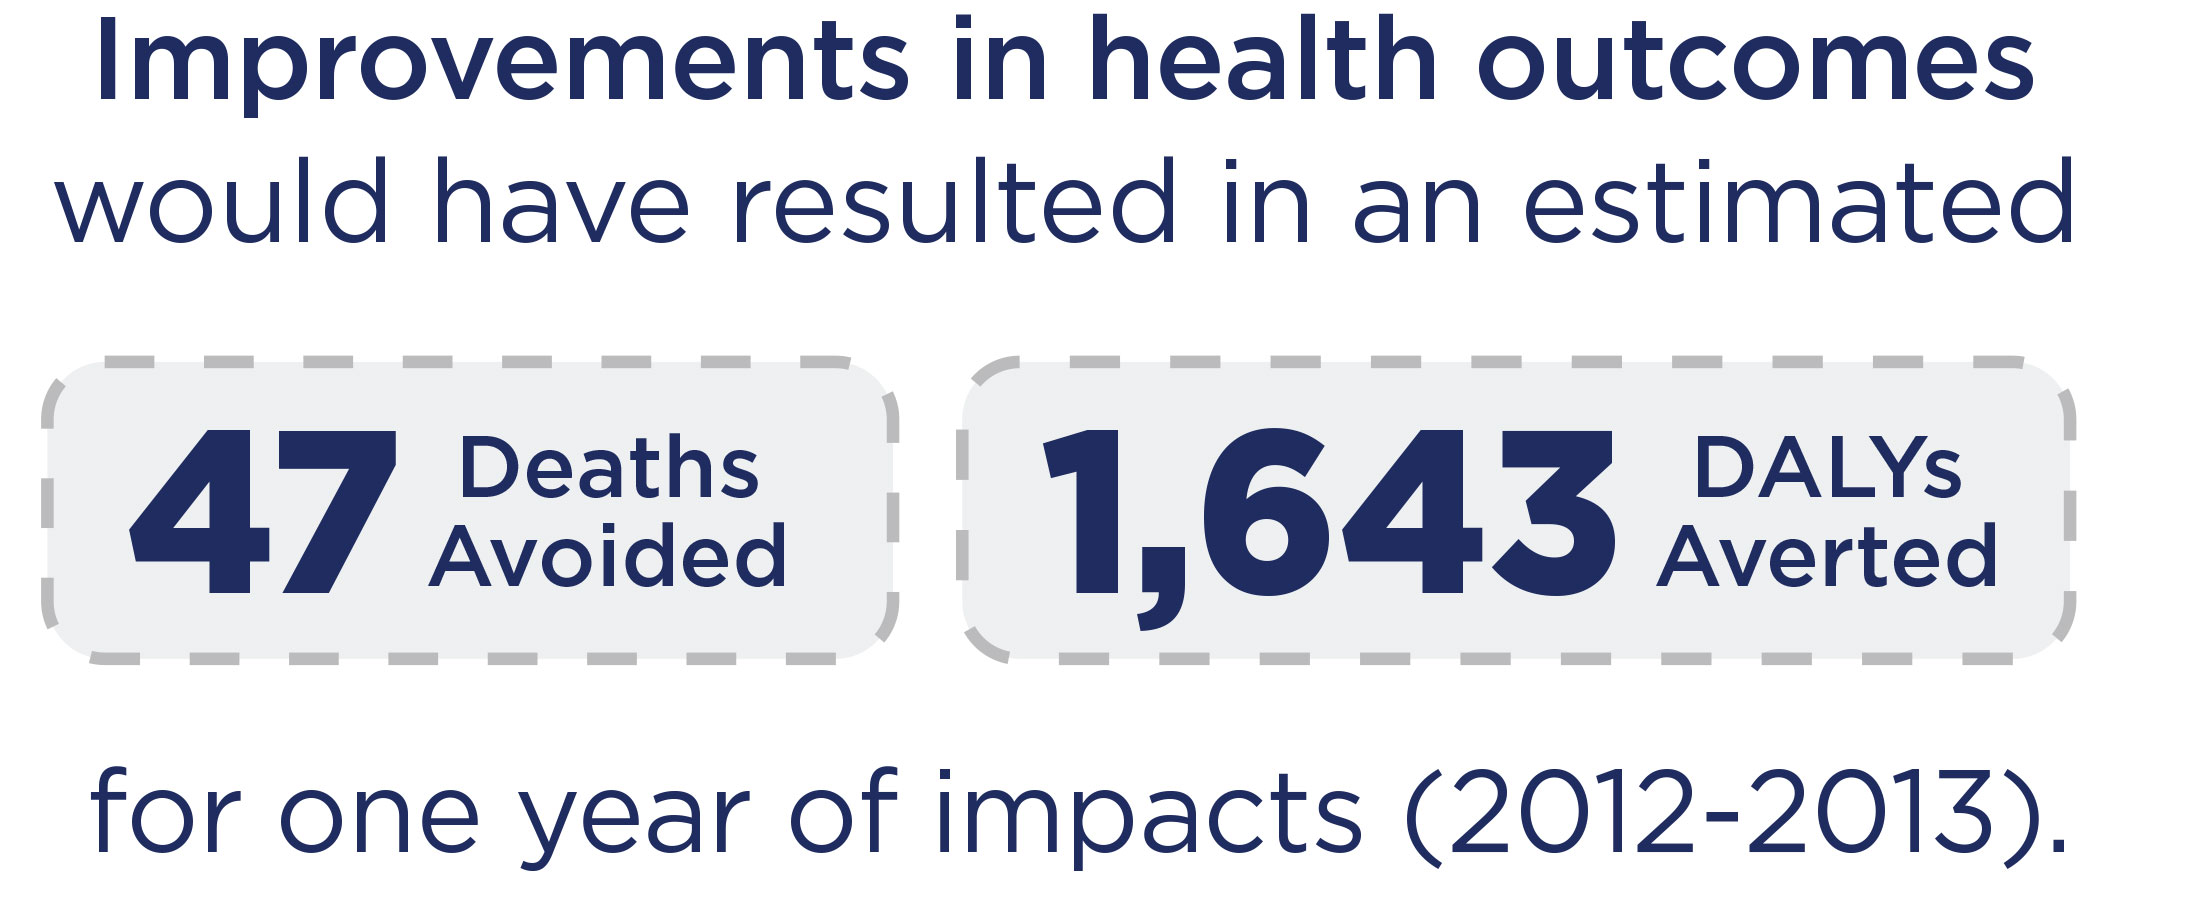 Improvements in health outcomes would have resulted in an estimated 47 deaths avoided for one year of impacts.